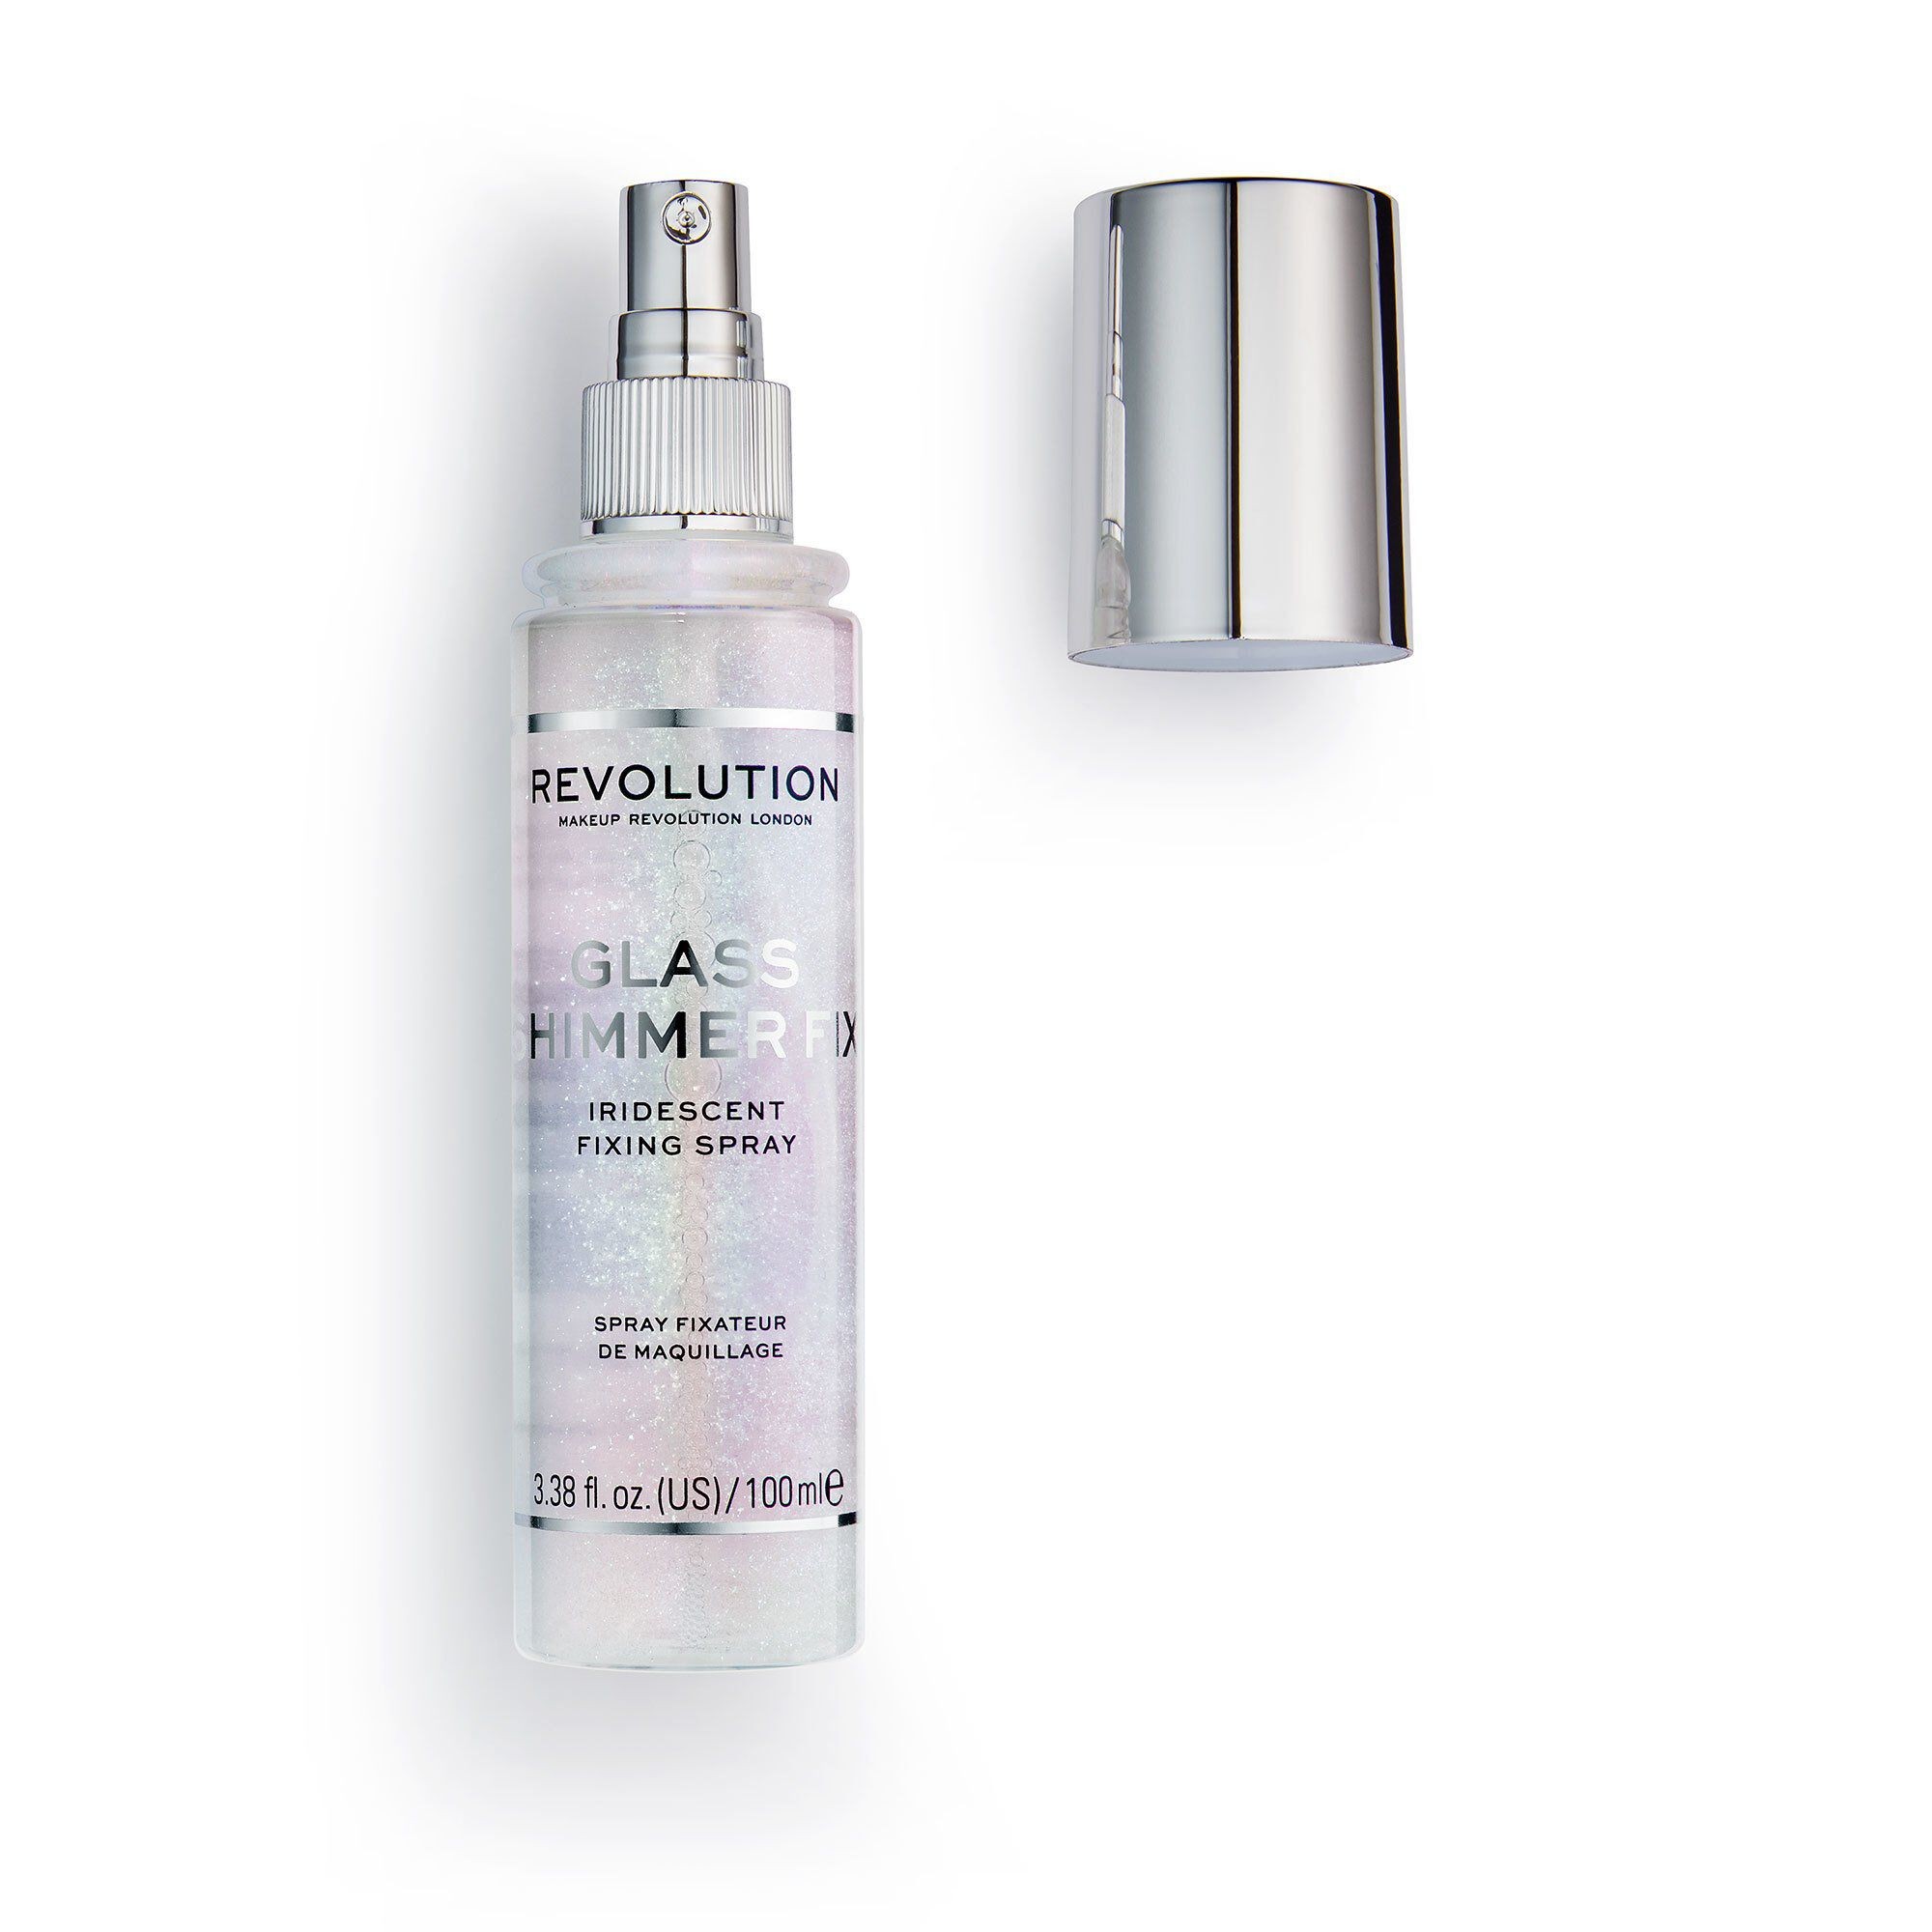 Make-Up Fixierspray - Glass Shimmer Iridescent Fixing Spray